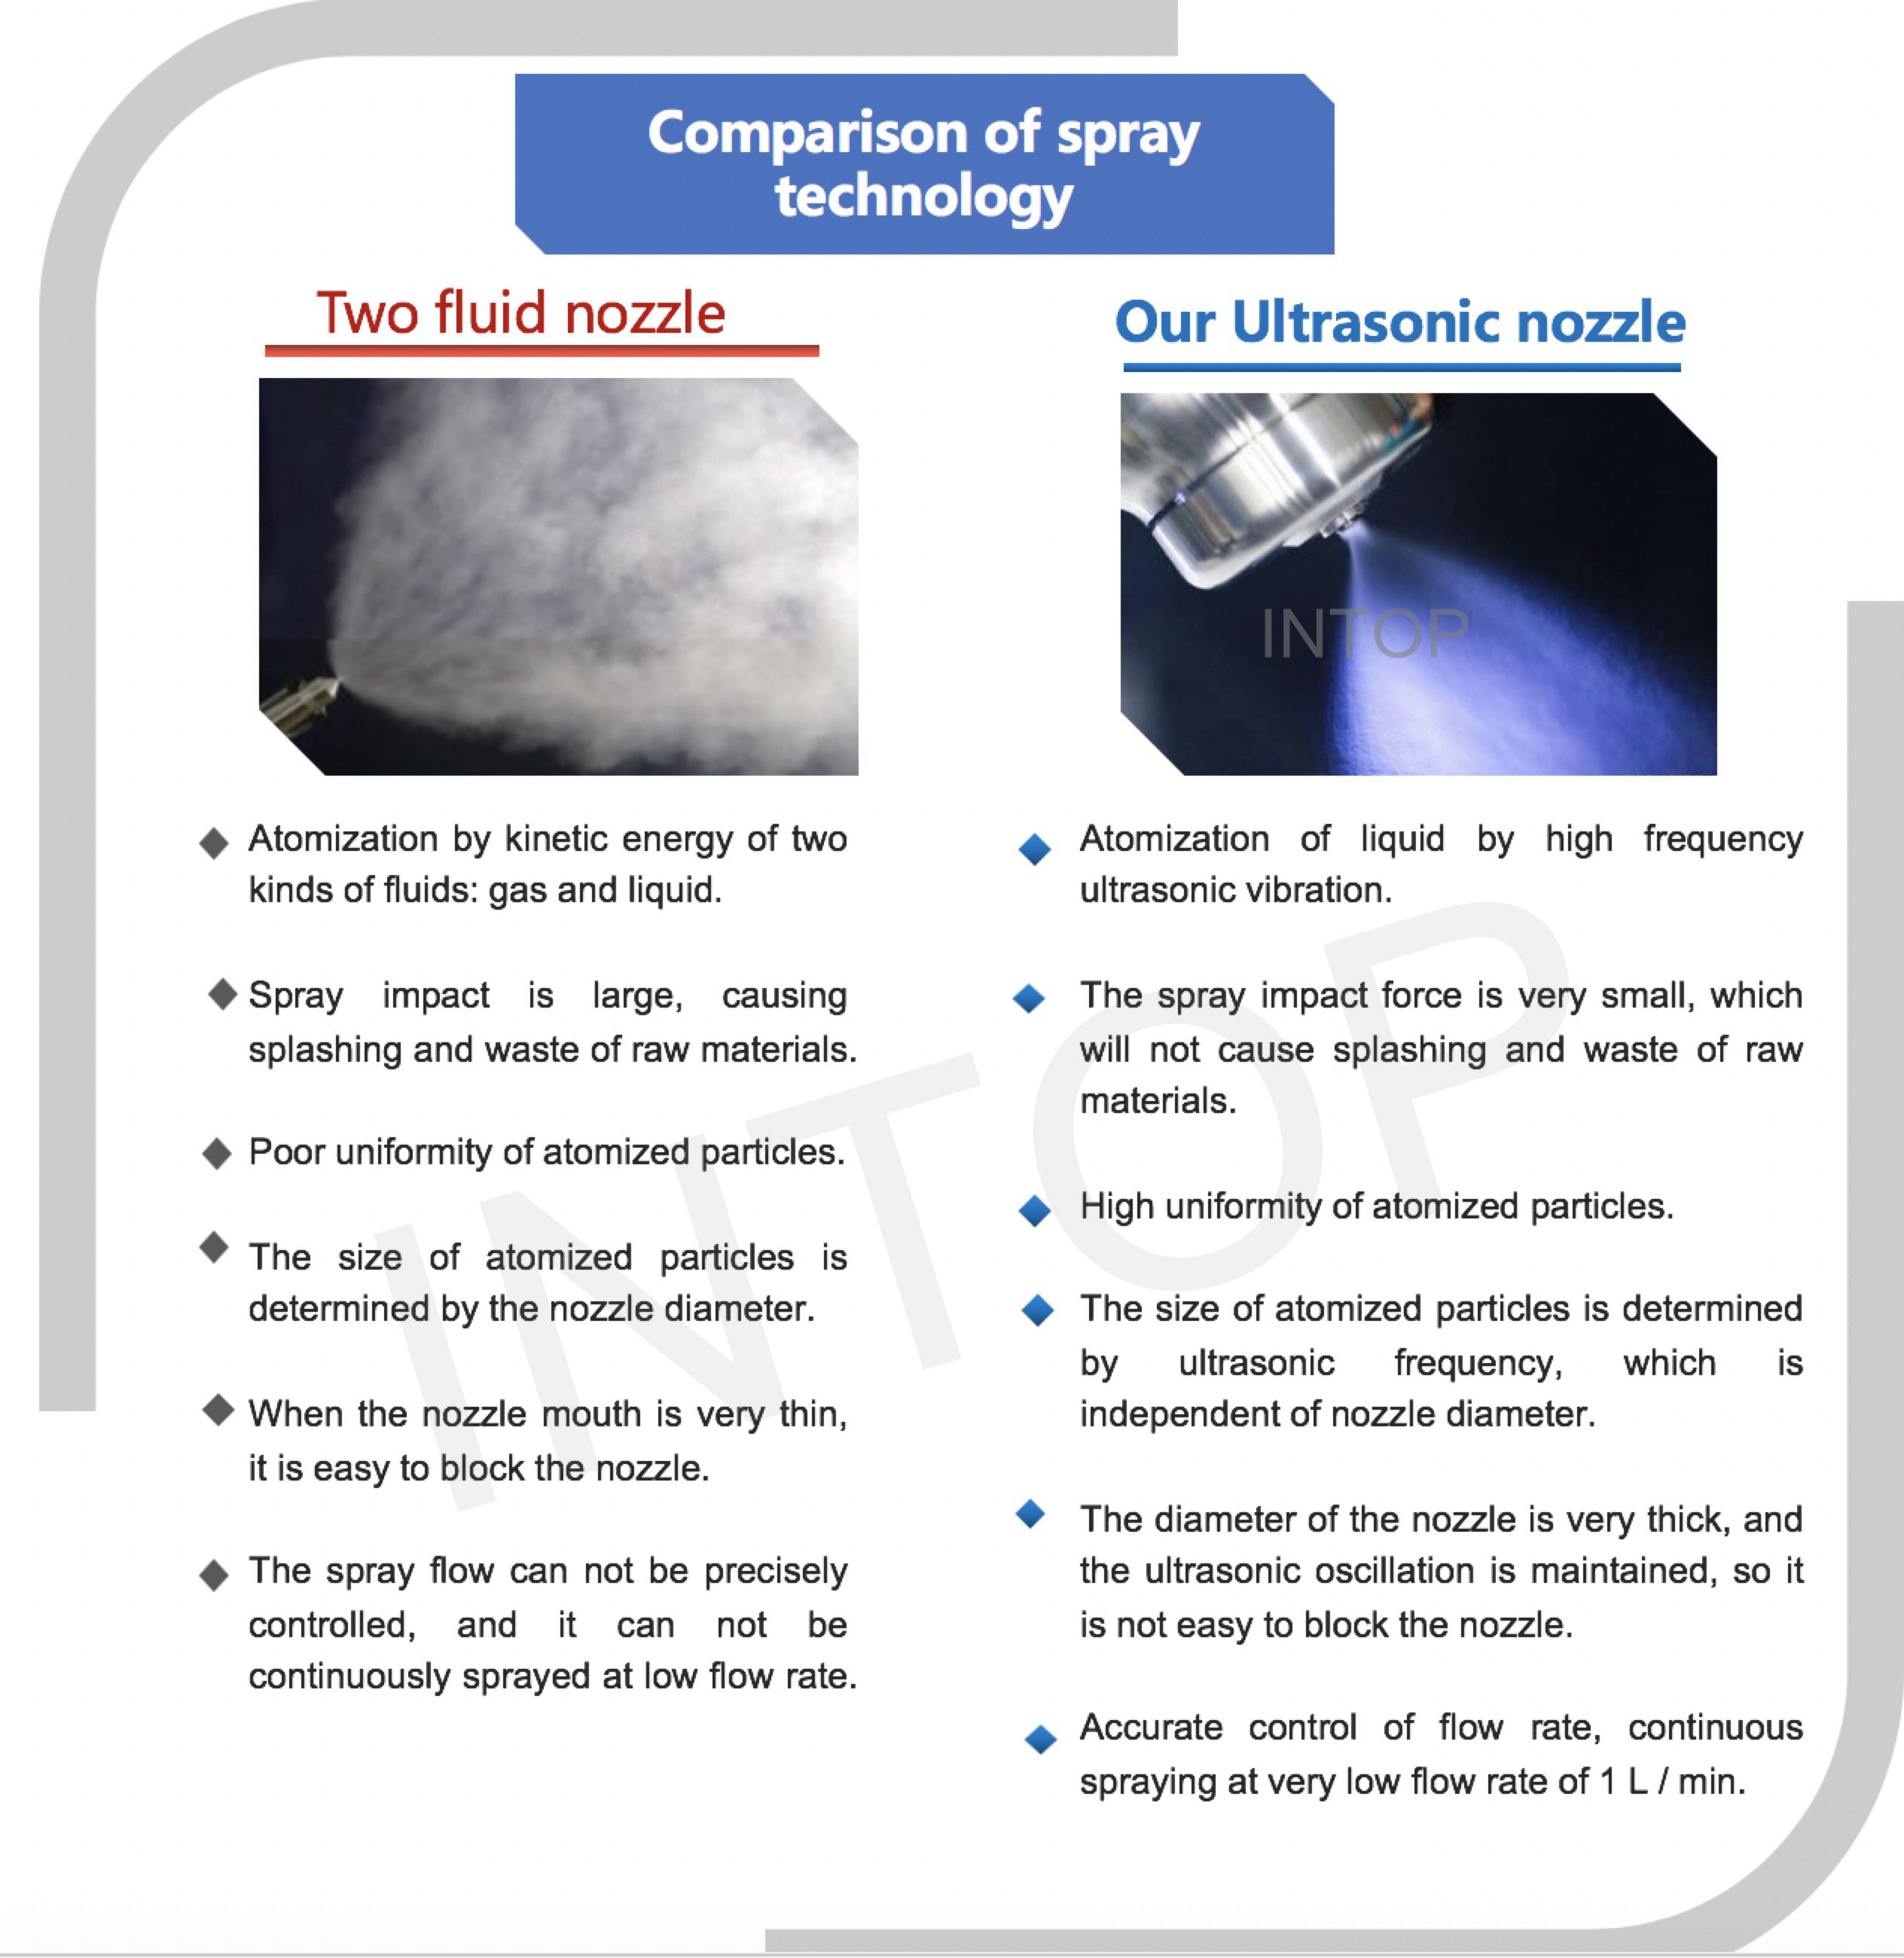 Comparesion of spray technology